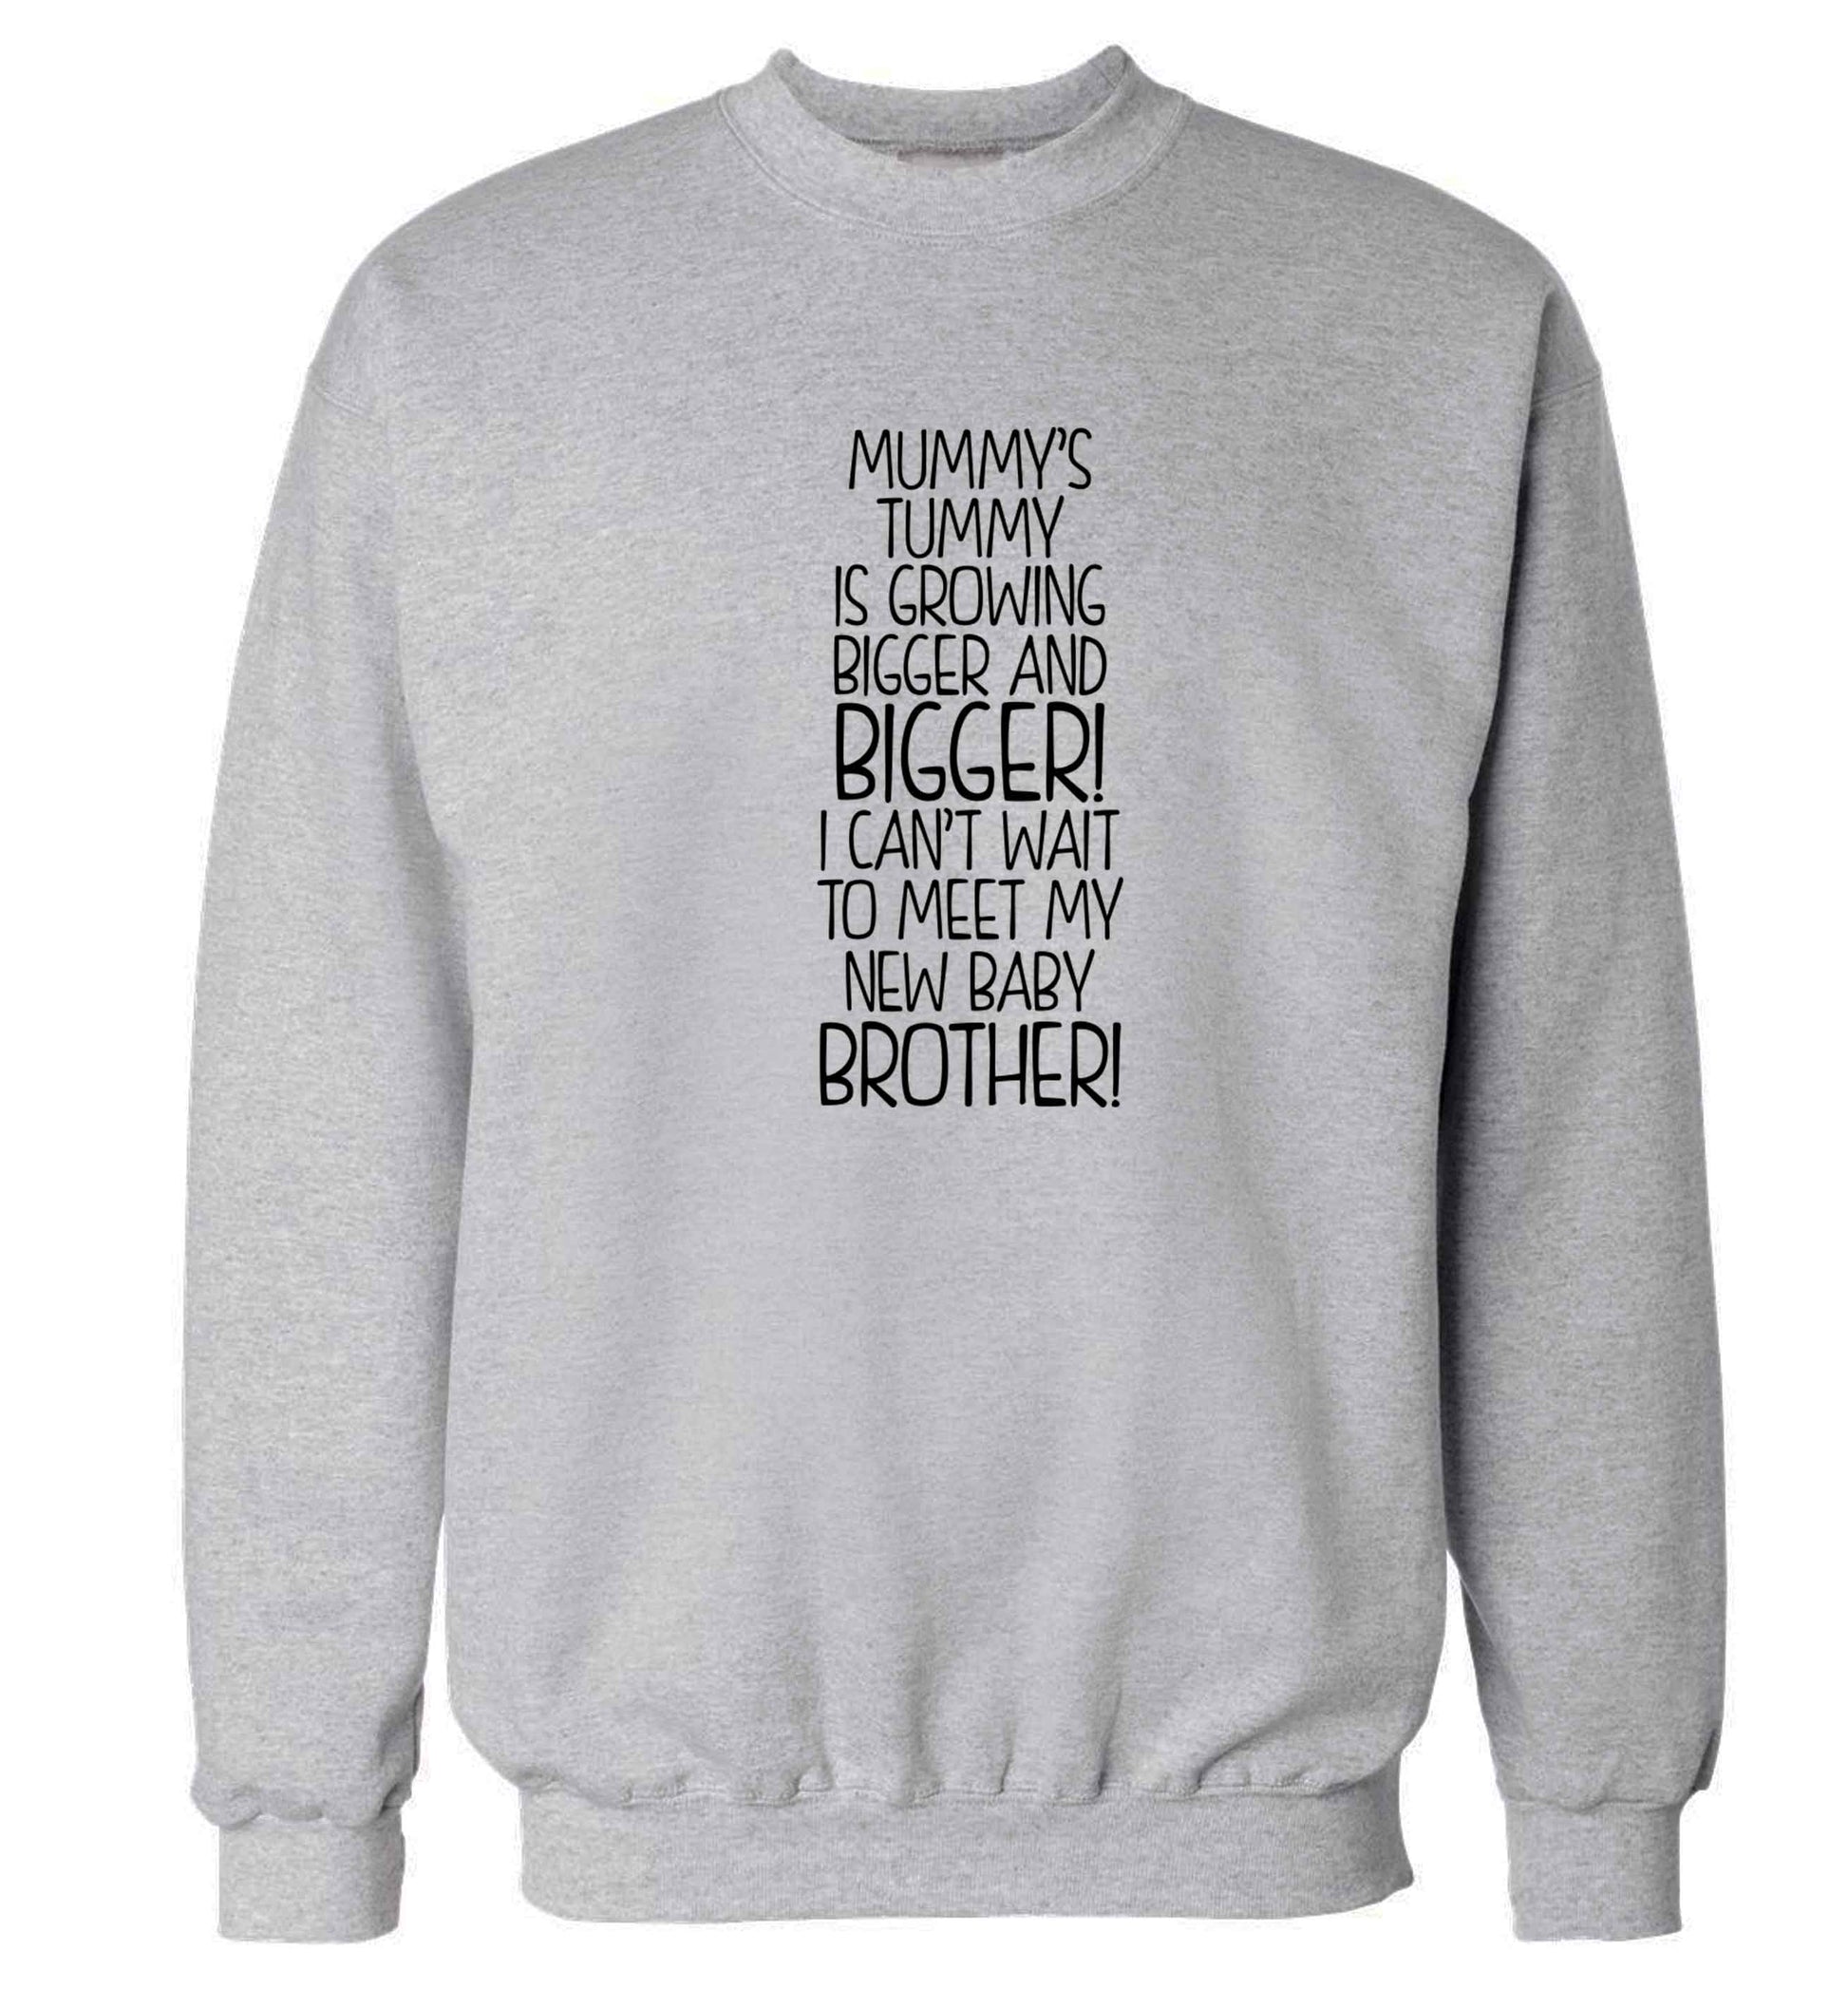 Mummy's tummy is growing bigger and bigger I can't wait to meet my new baby brother! Adult's unisex grey Sweater 2XL